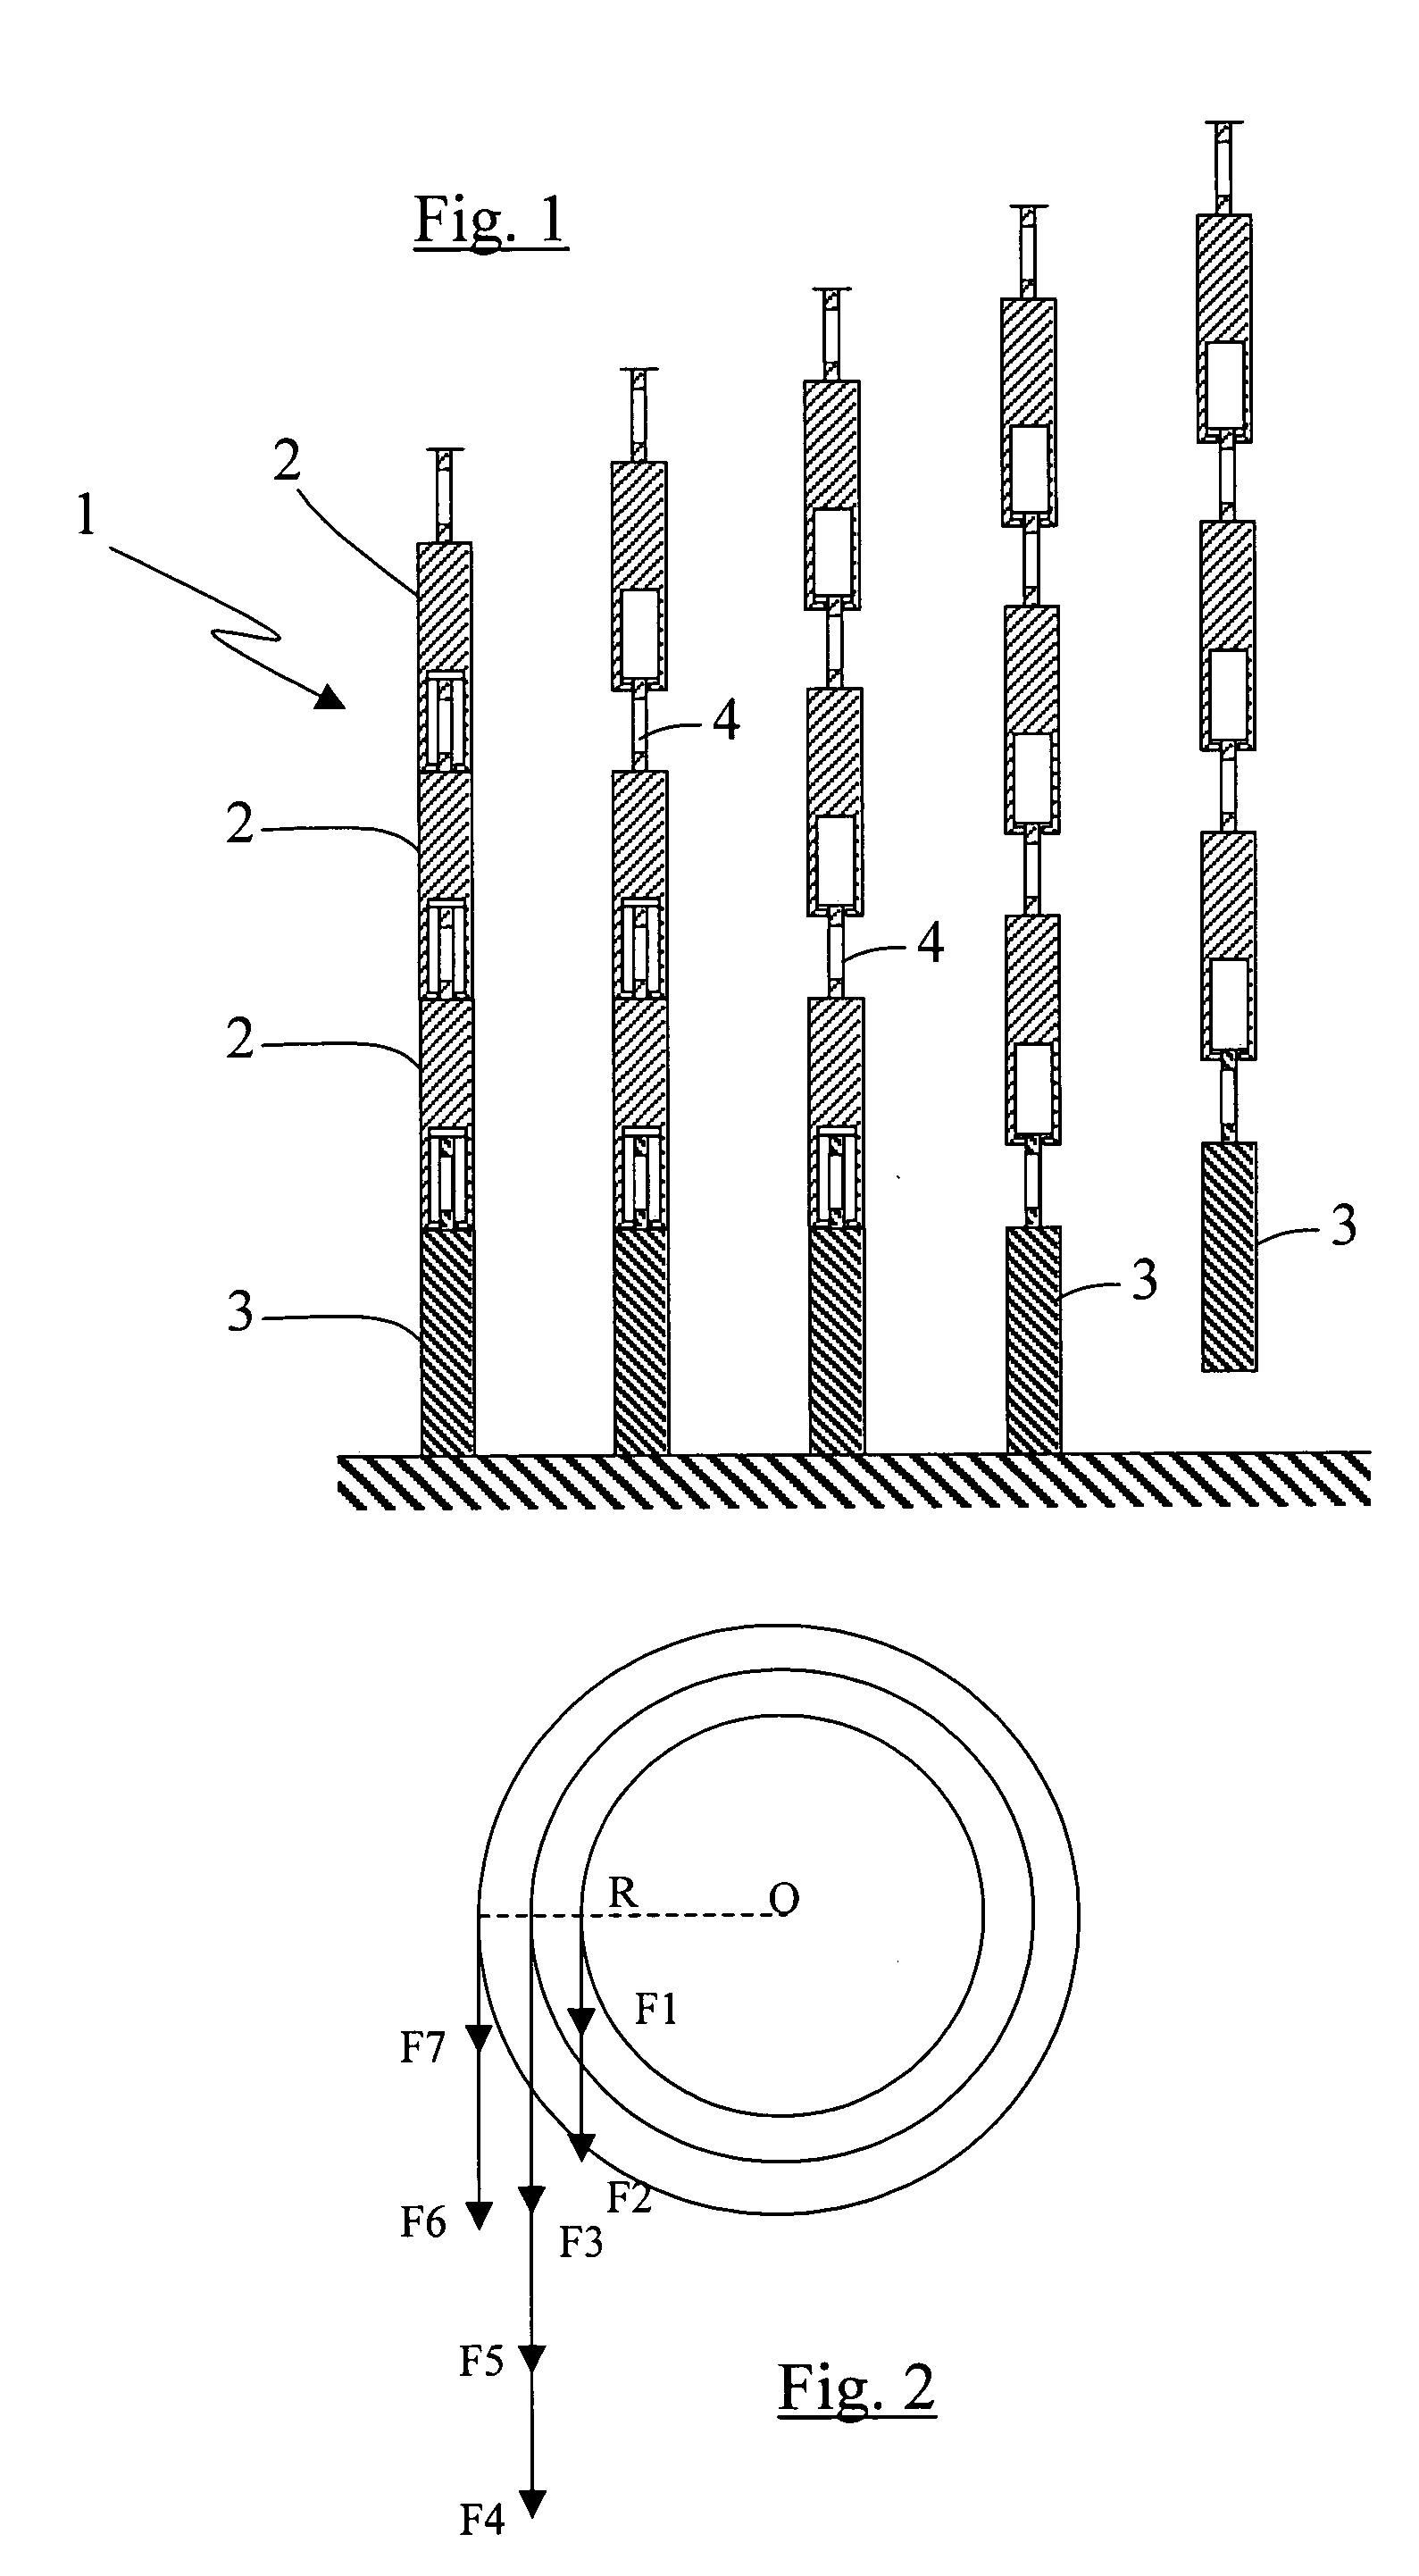 Method of determining an intermediate open position for a roller blind